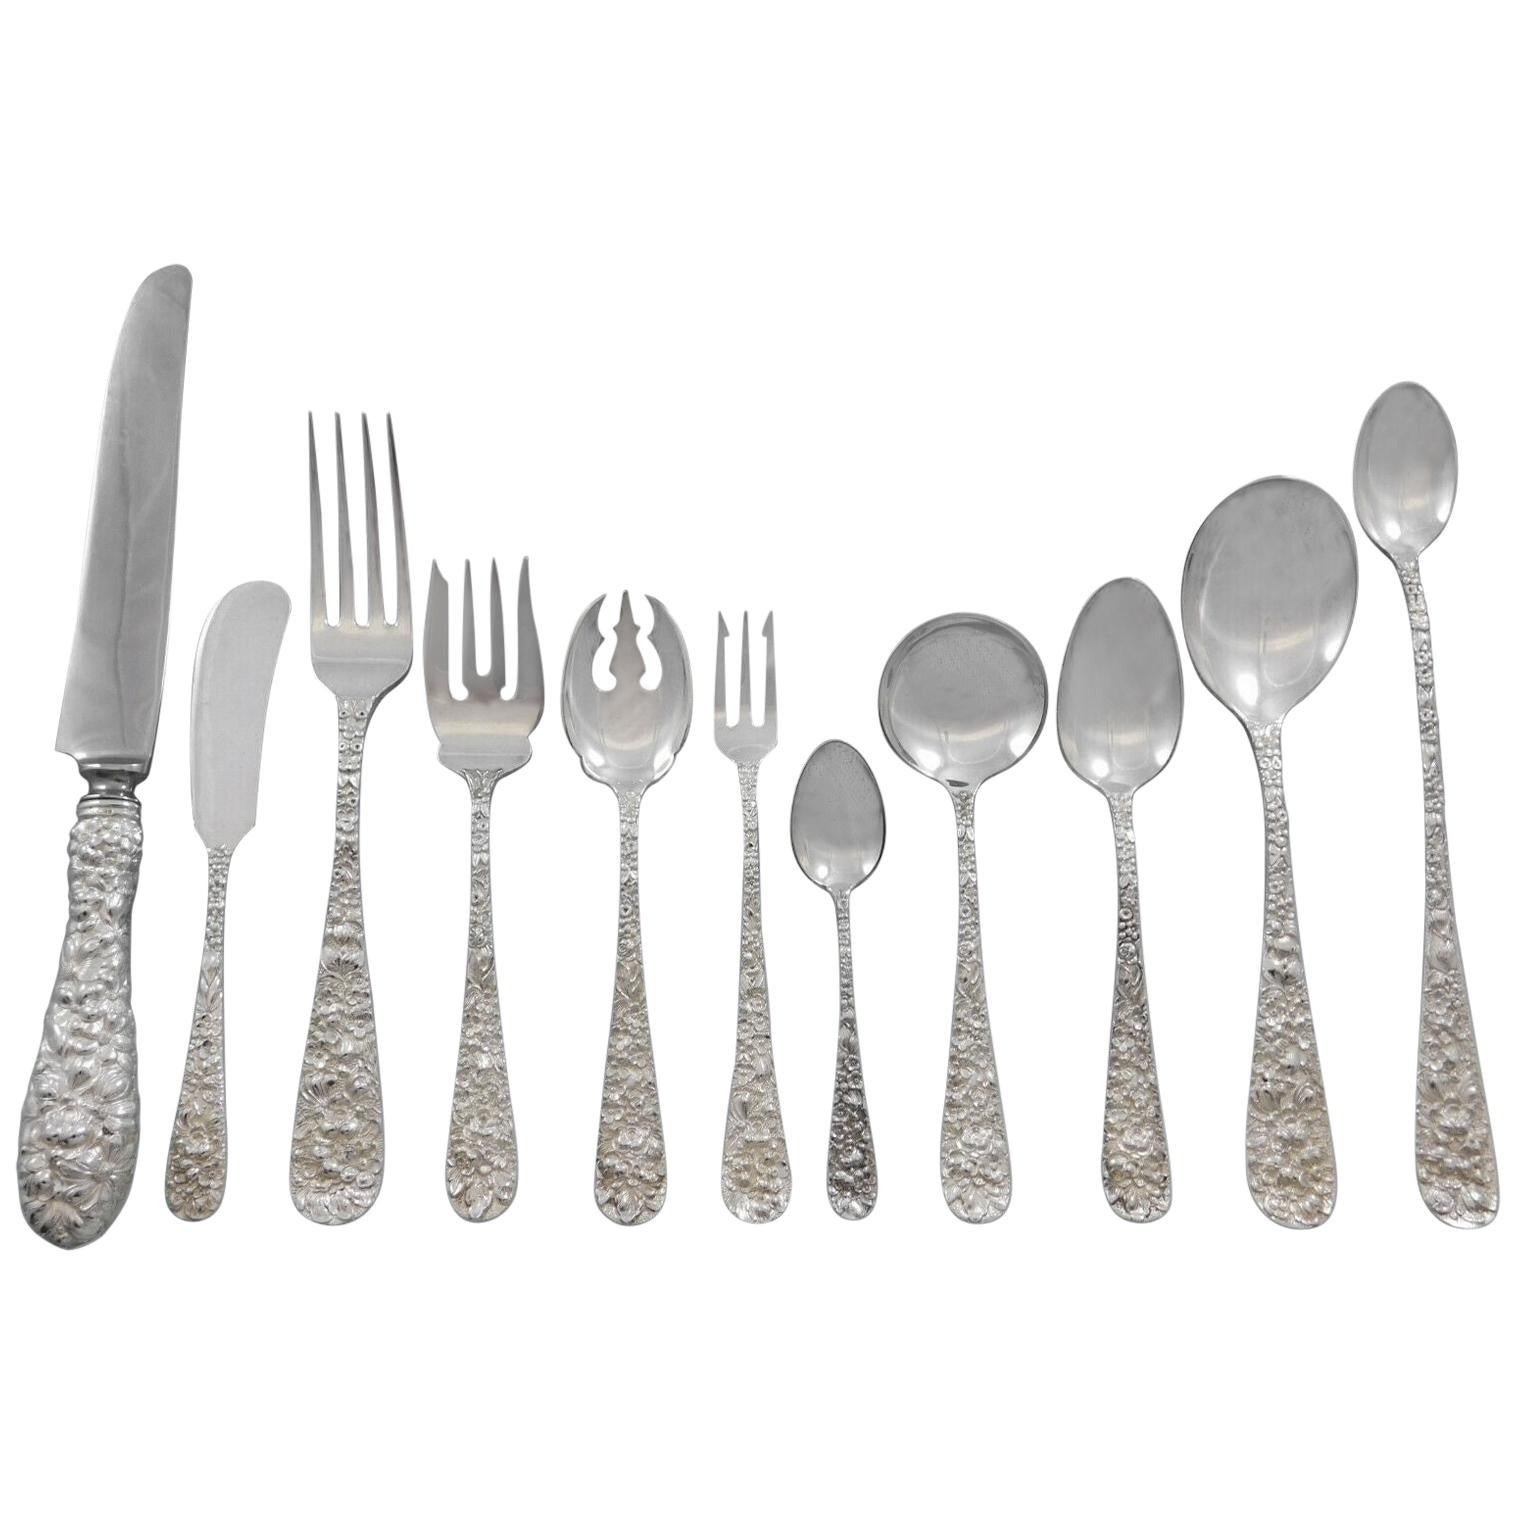 Rose by Stieff Sterling Silver Flatware Set for 24 Service 285pc Repousse Dinner